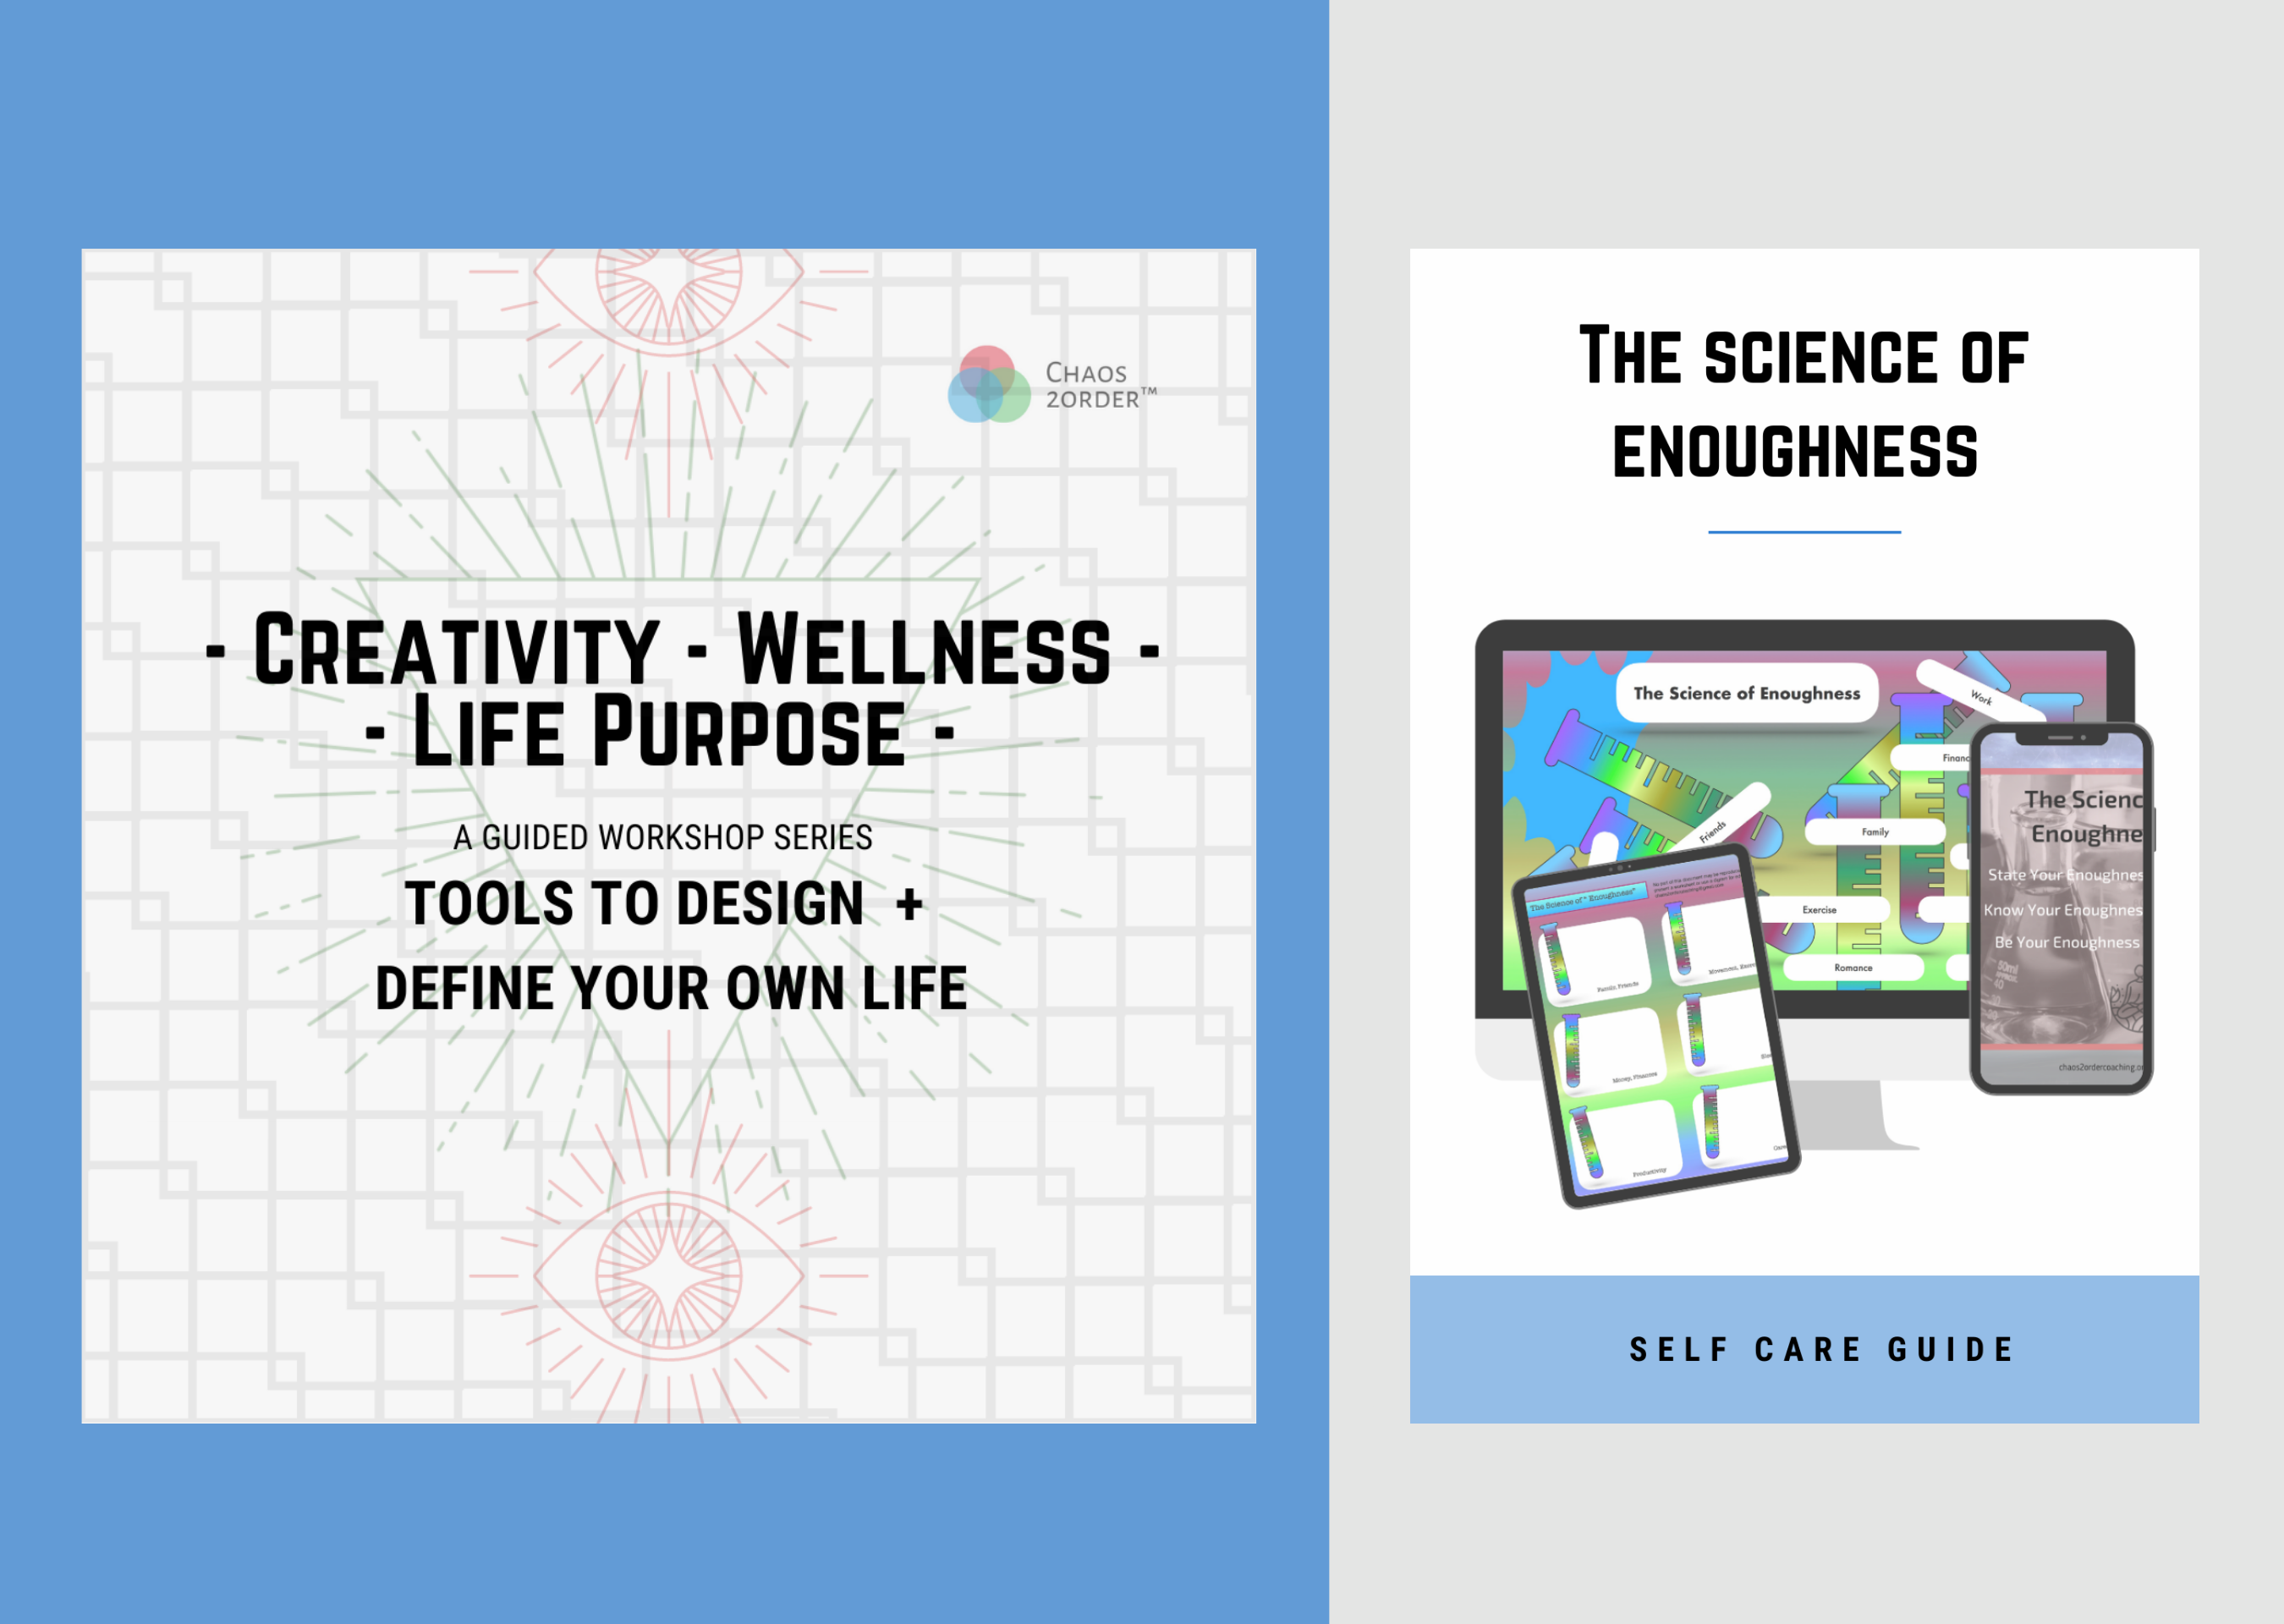 Creativity - Wellness - Life Purpose - Guided Workshop Series, The Science of Enoughness, Self Care Guide